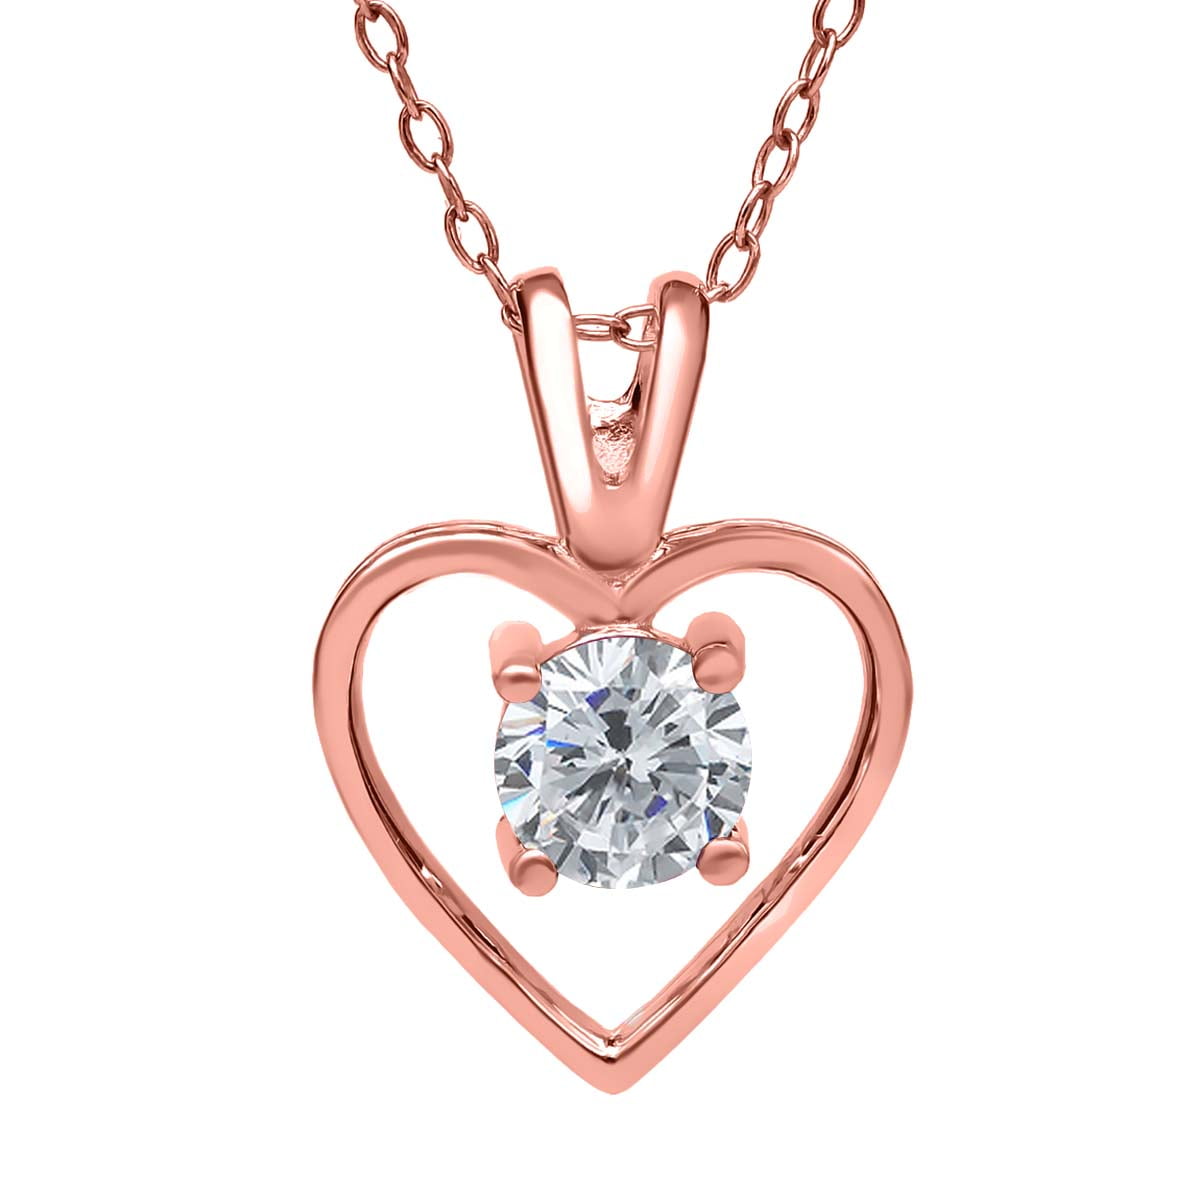 Details about   1.00 Ct Round Cut Diamond Solitaire Pendant W/18" Chain 14k White Gold Over 